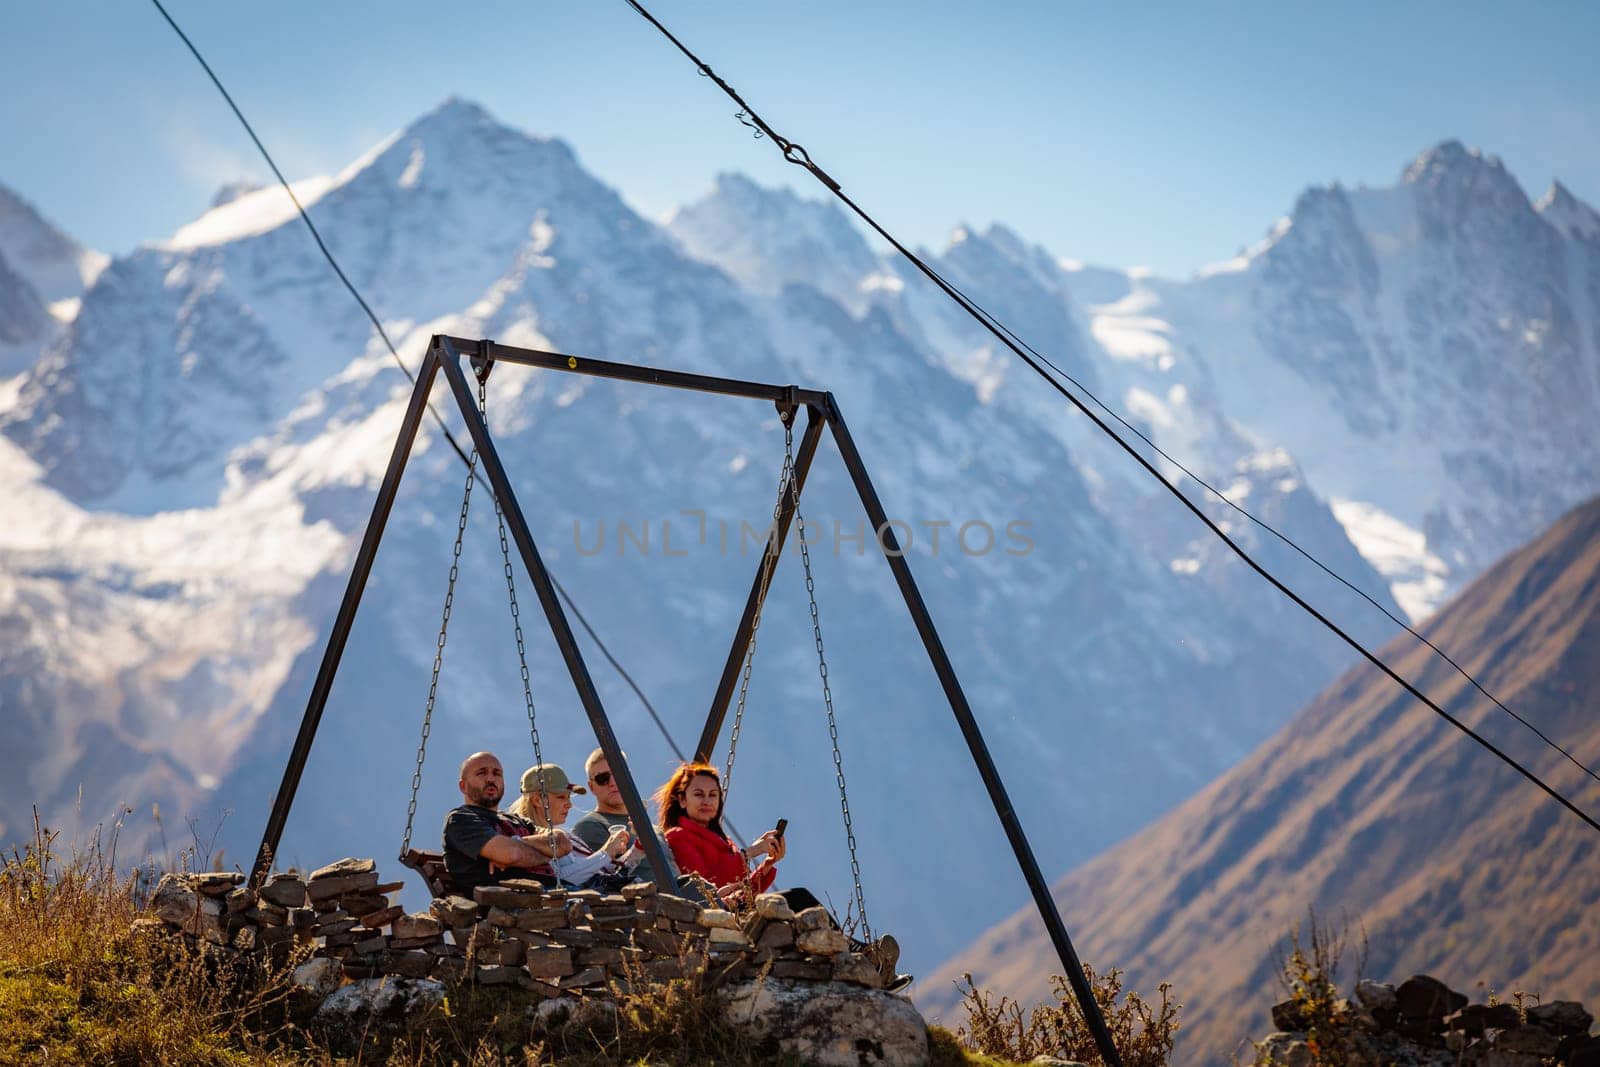 On a swing in the mountains: friendly communication by Yurich32